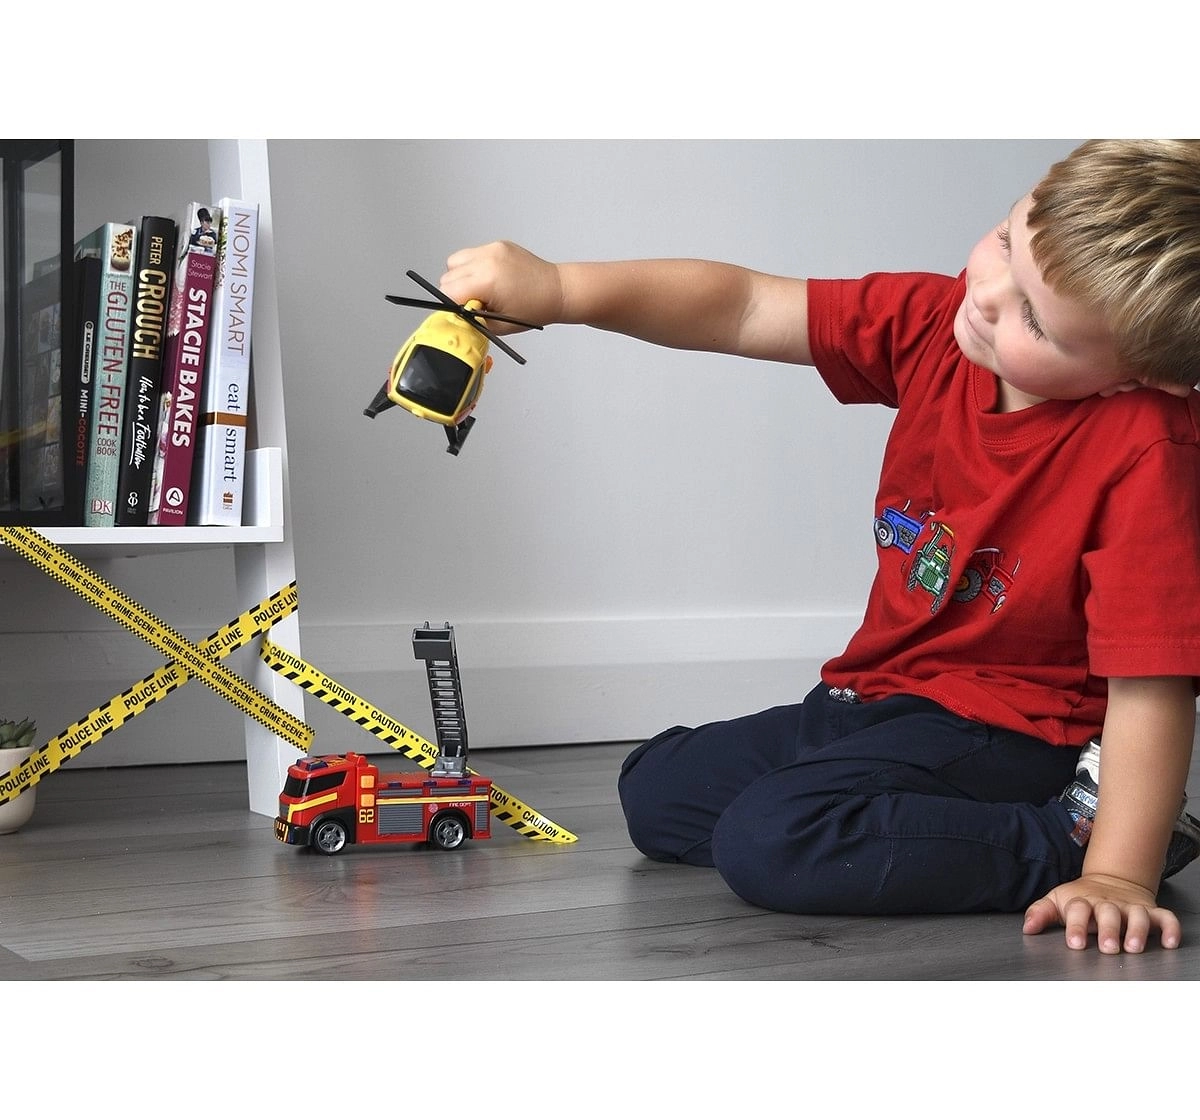 Ralleyz Light And Sound Helicopter- Small Vehicles for Kids age 3Y+ 